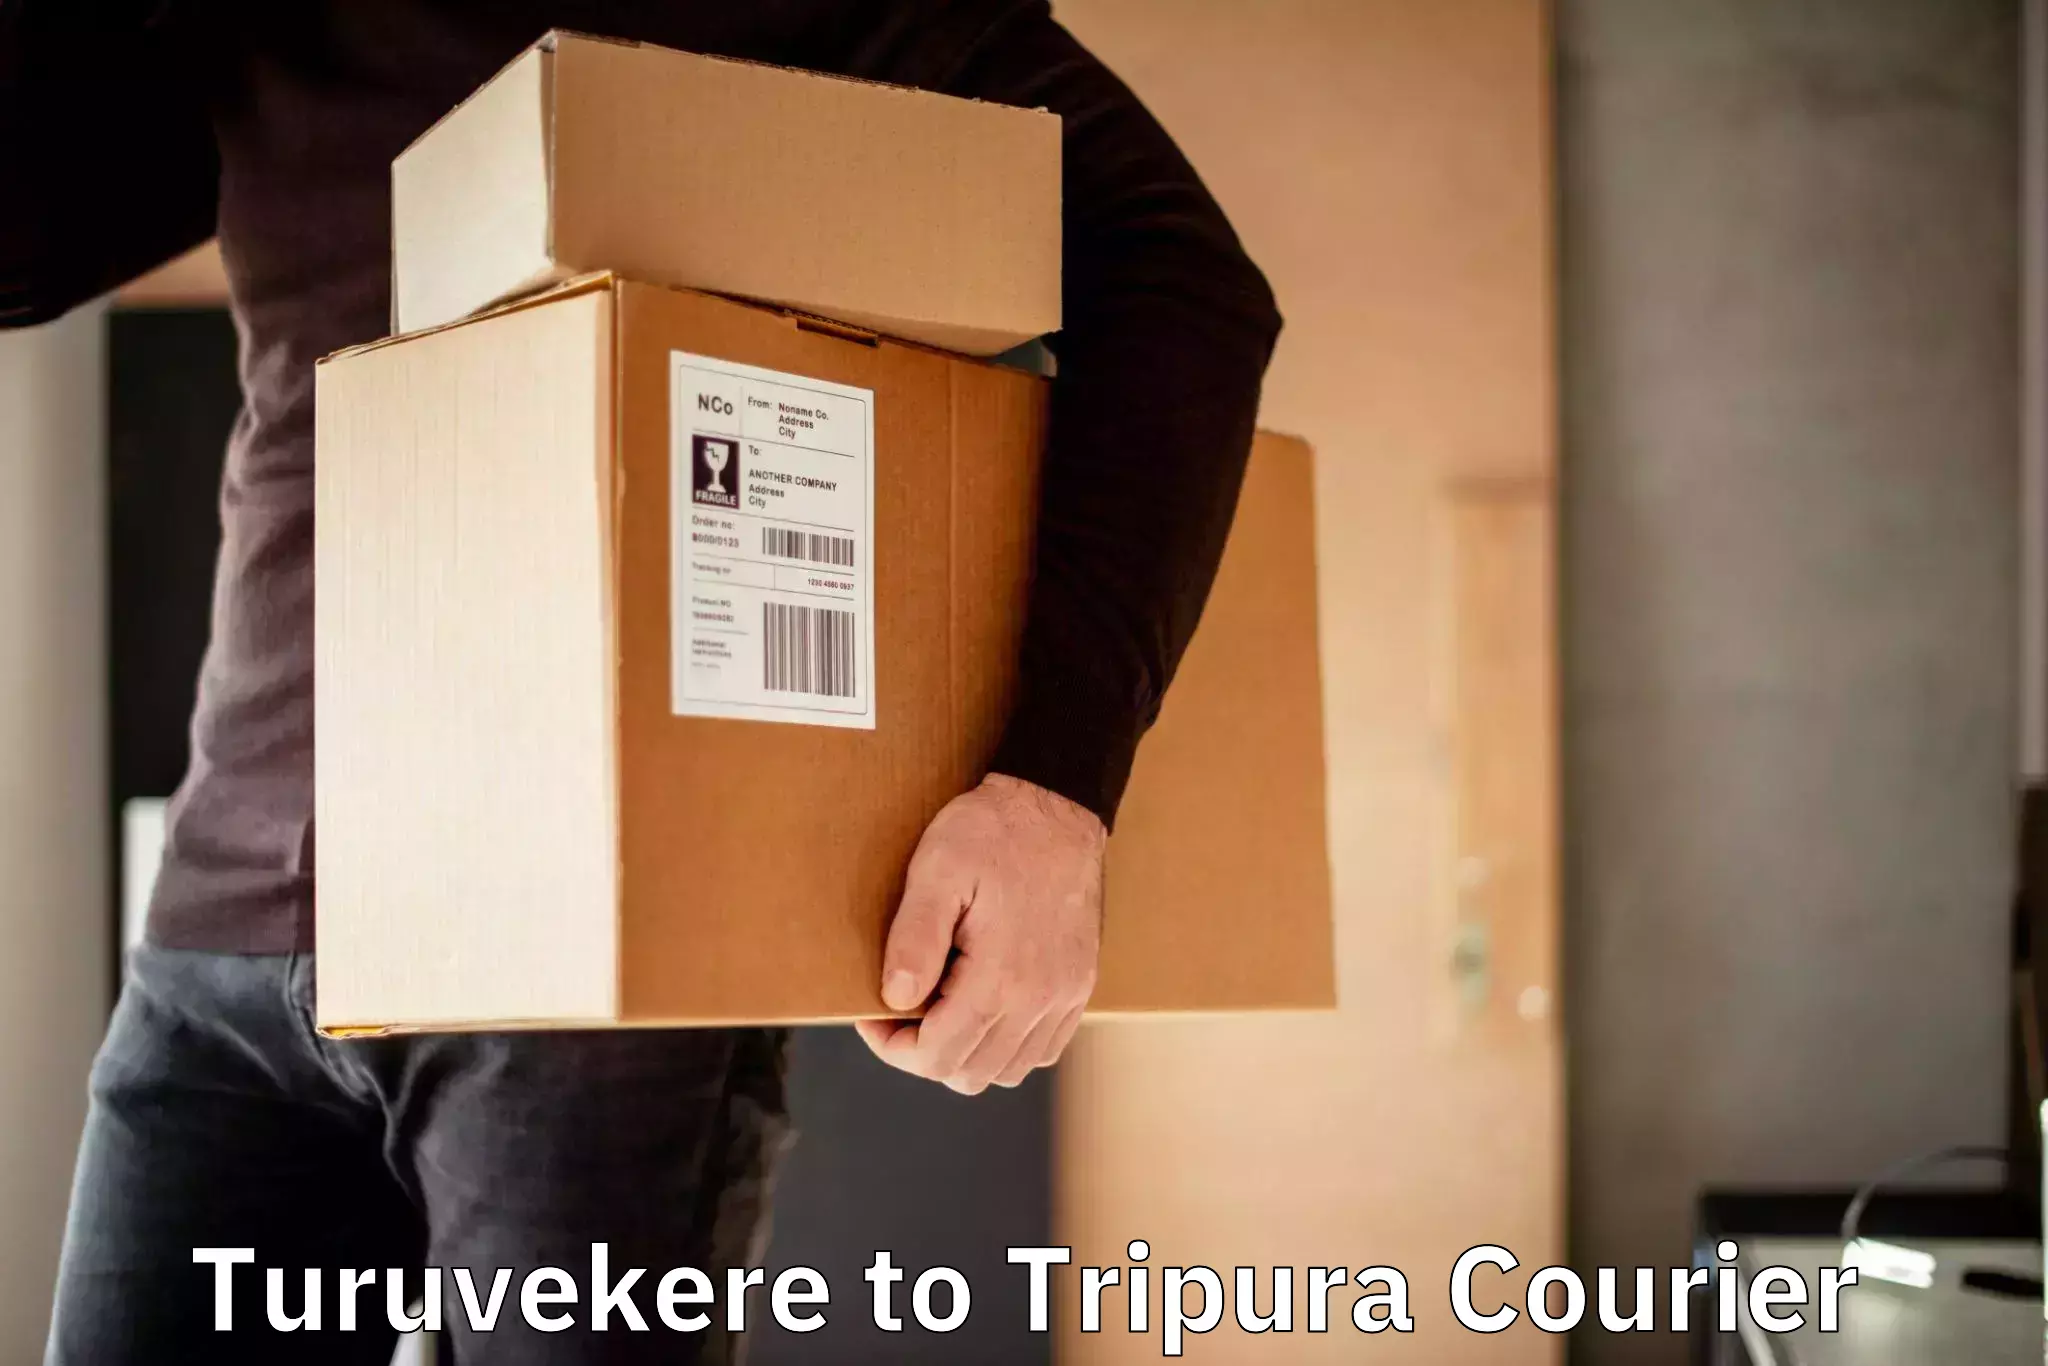 Cargo delivery service Turuvekere to Udaipur Tripura